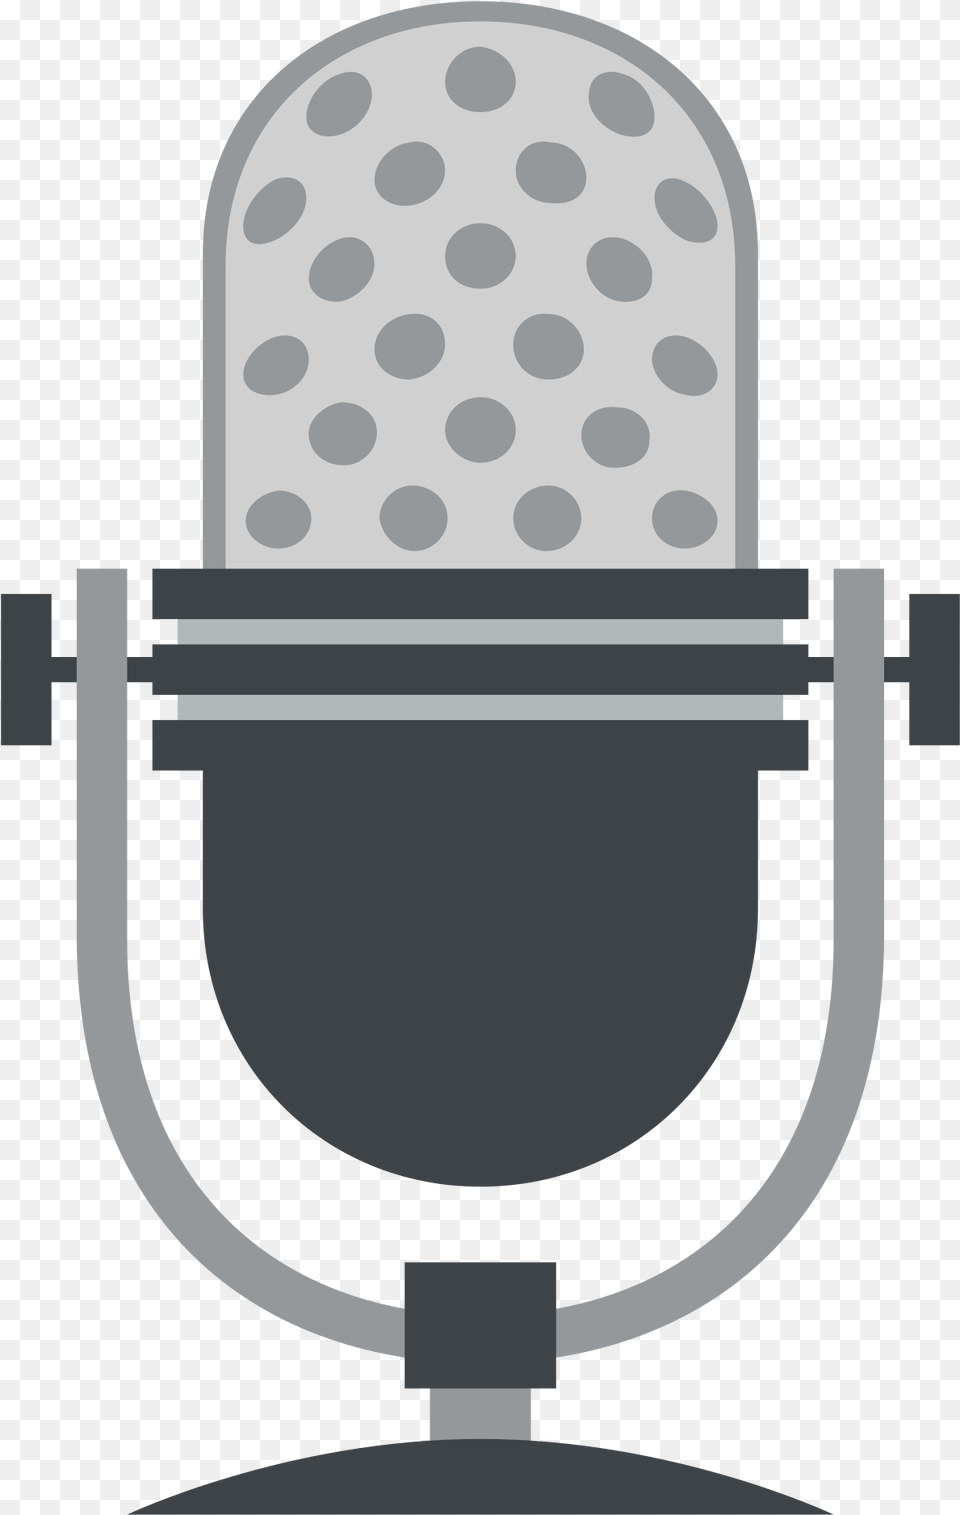 Microphone Clip Art Black And White Microphone Emoji, Electrical Device Png Image